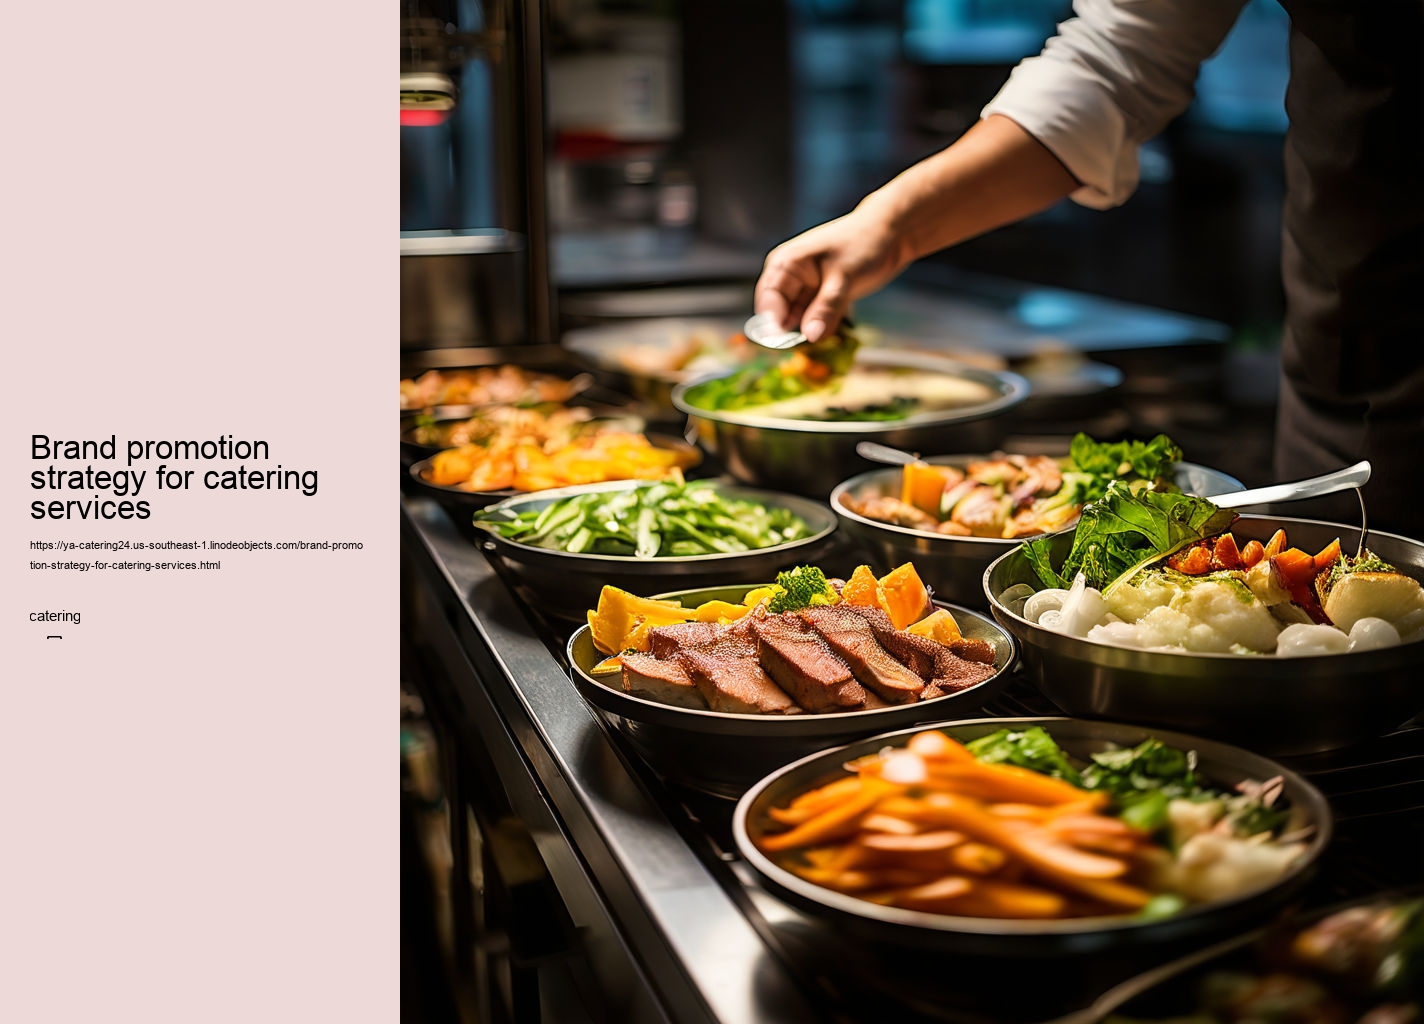 Brand promotion strategy for catering services